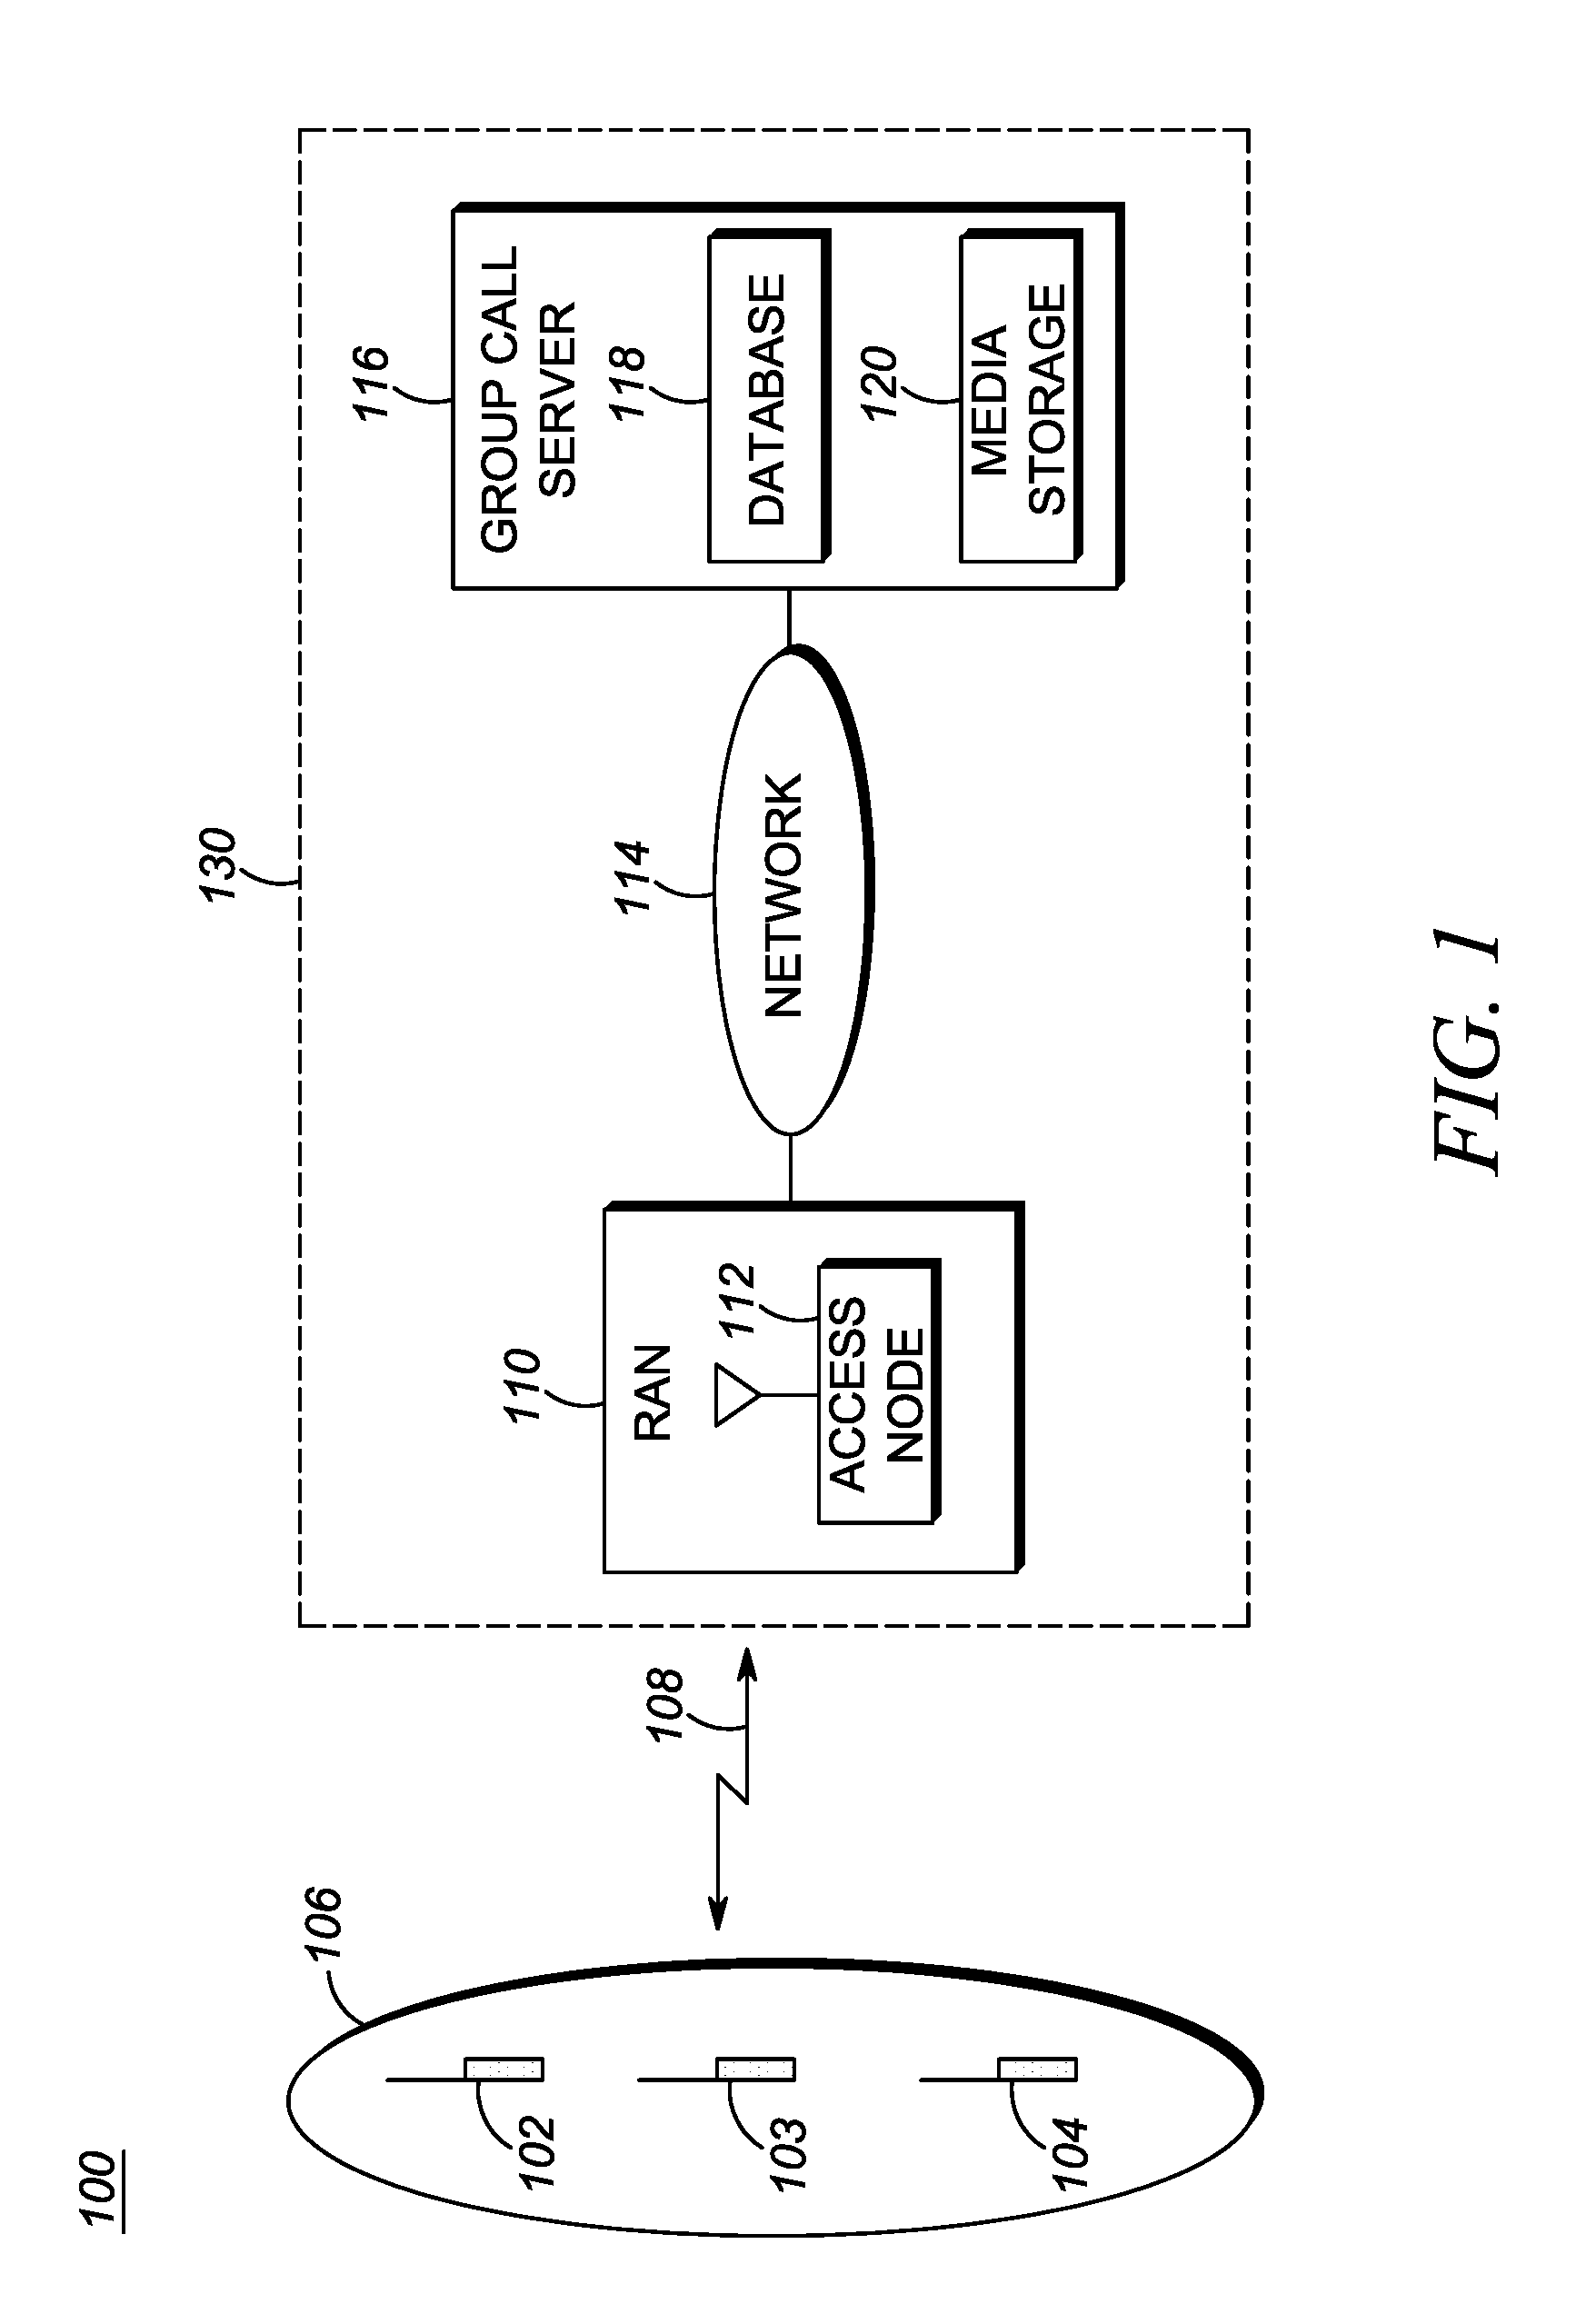 Method and apparatus for handling a missed group call in a public safety communication session